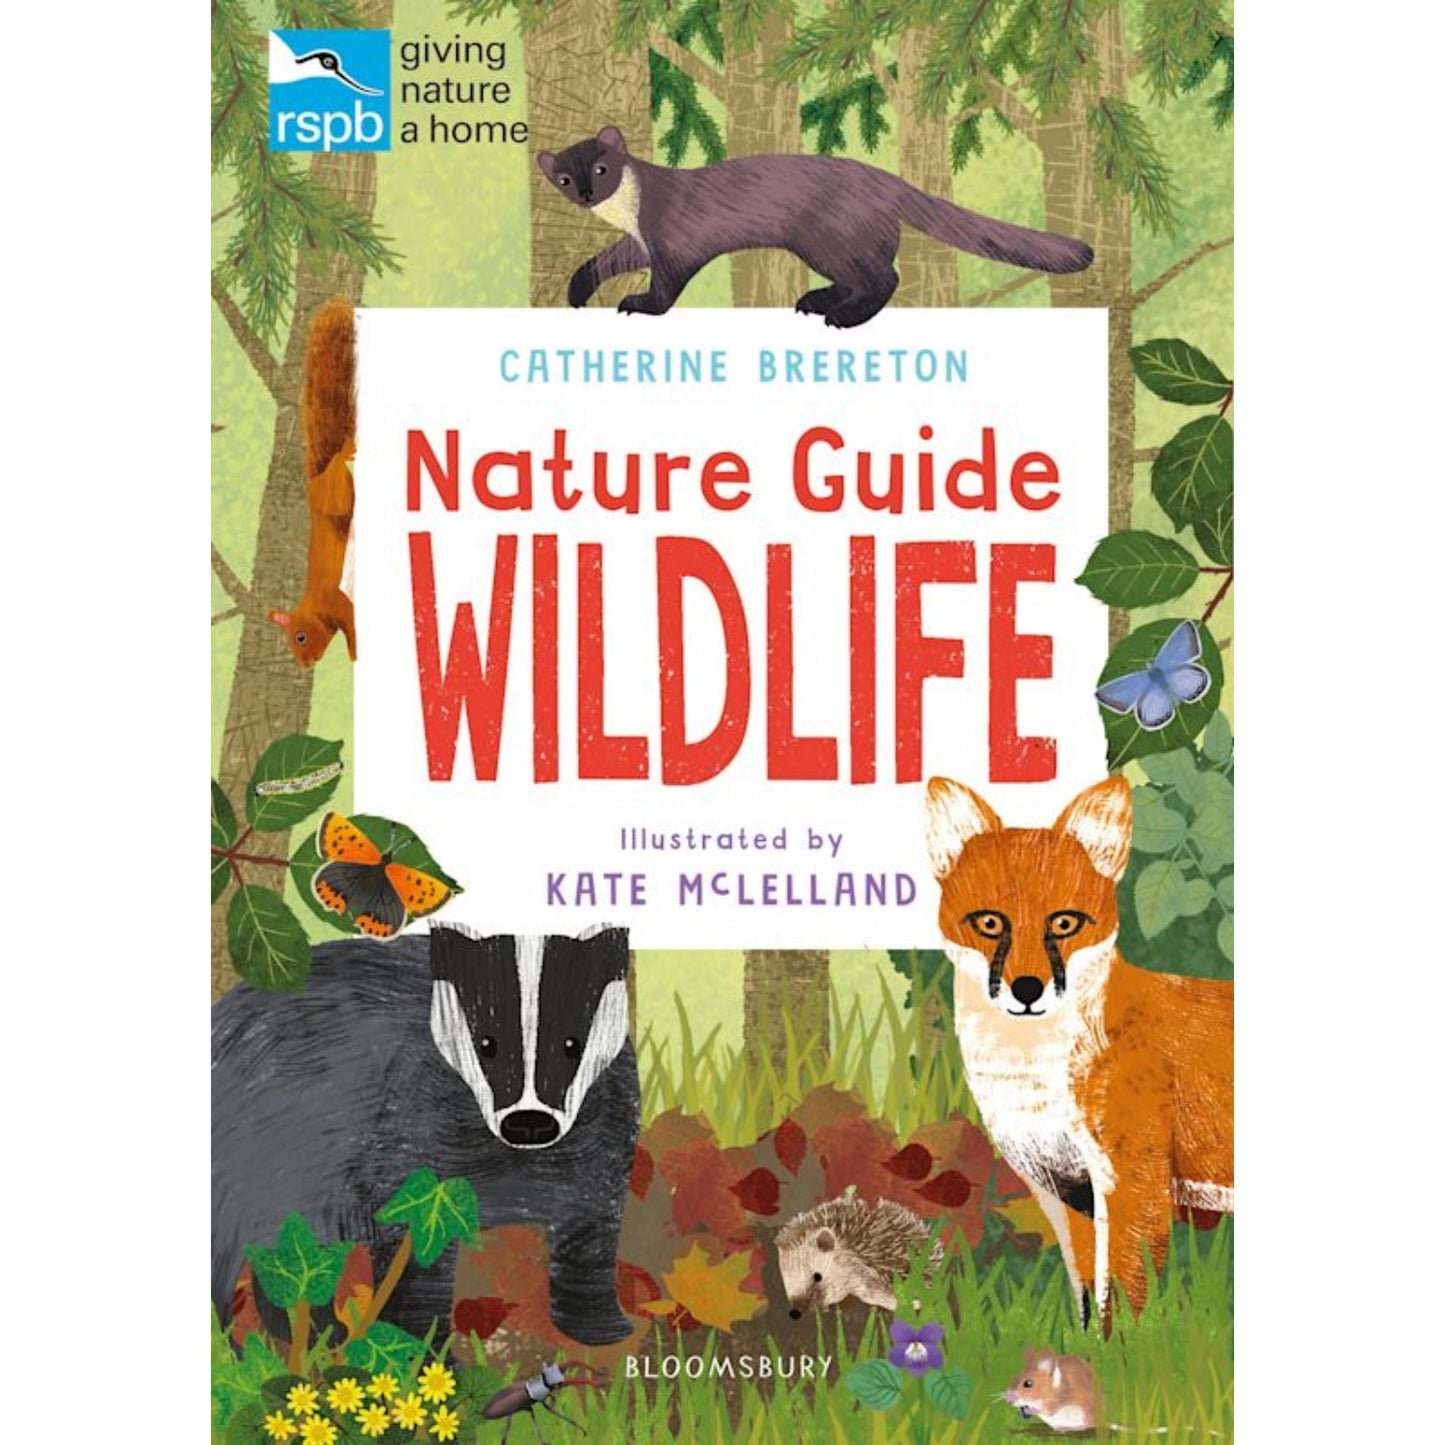 Wildlife - RSPB Nature Guide | Children's Book on Nature